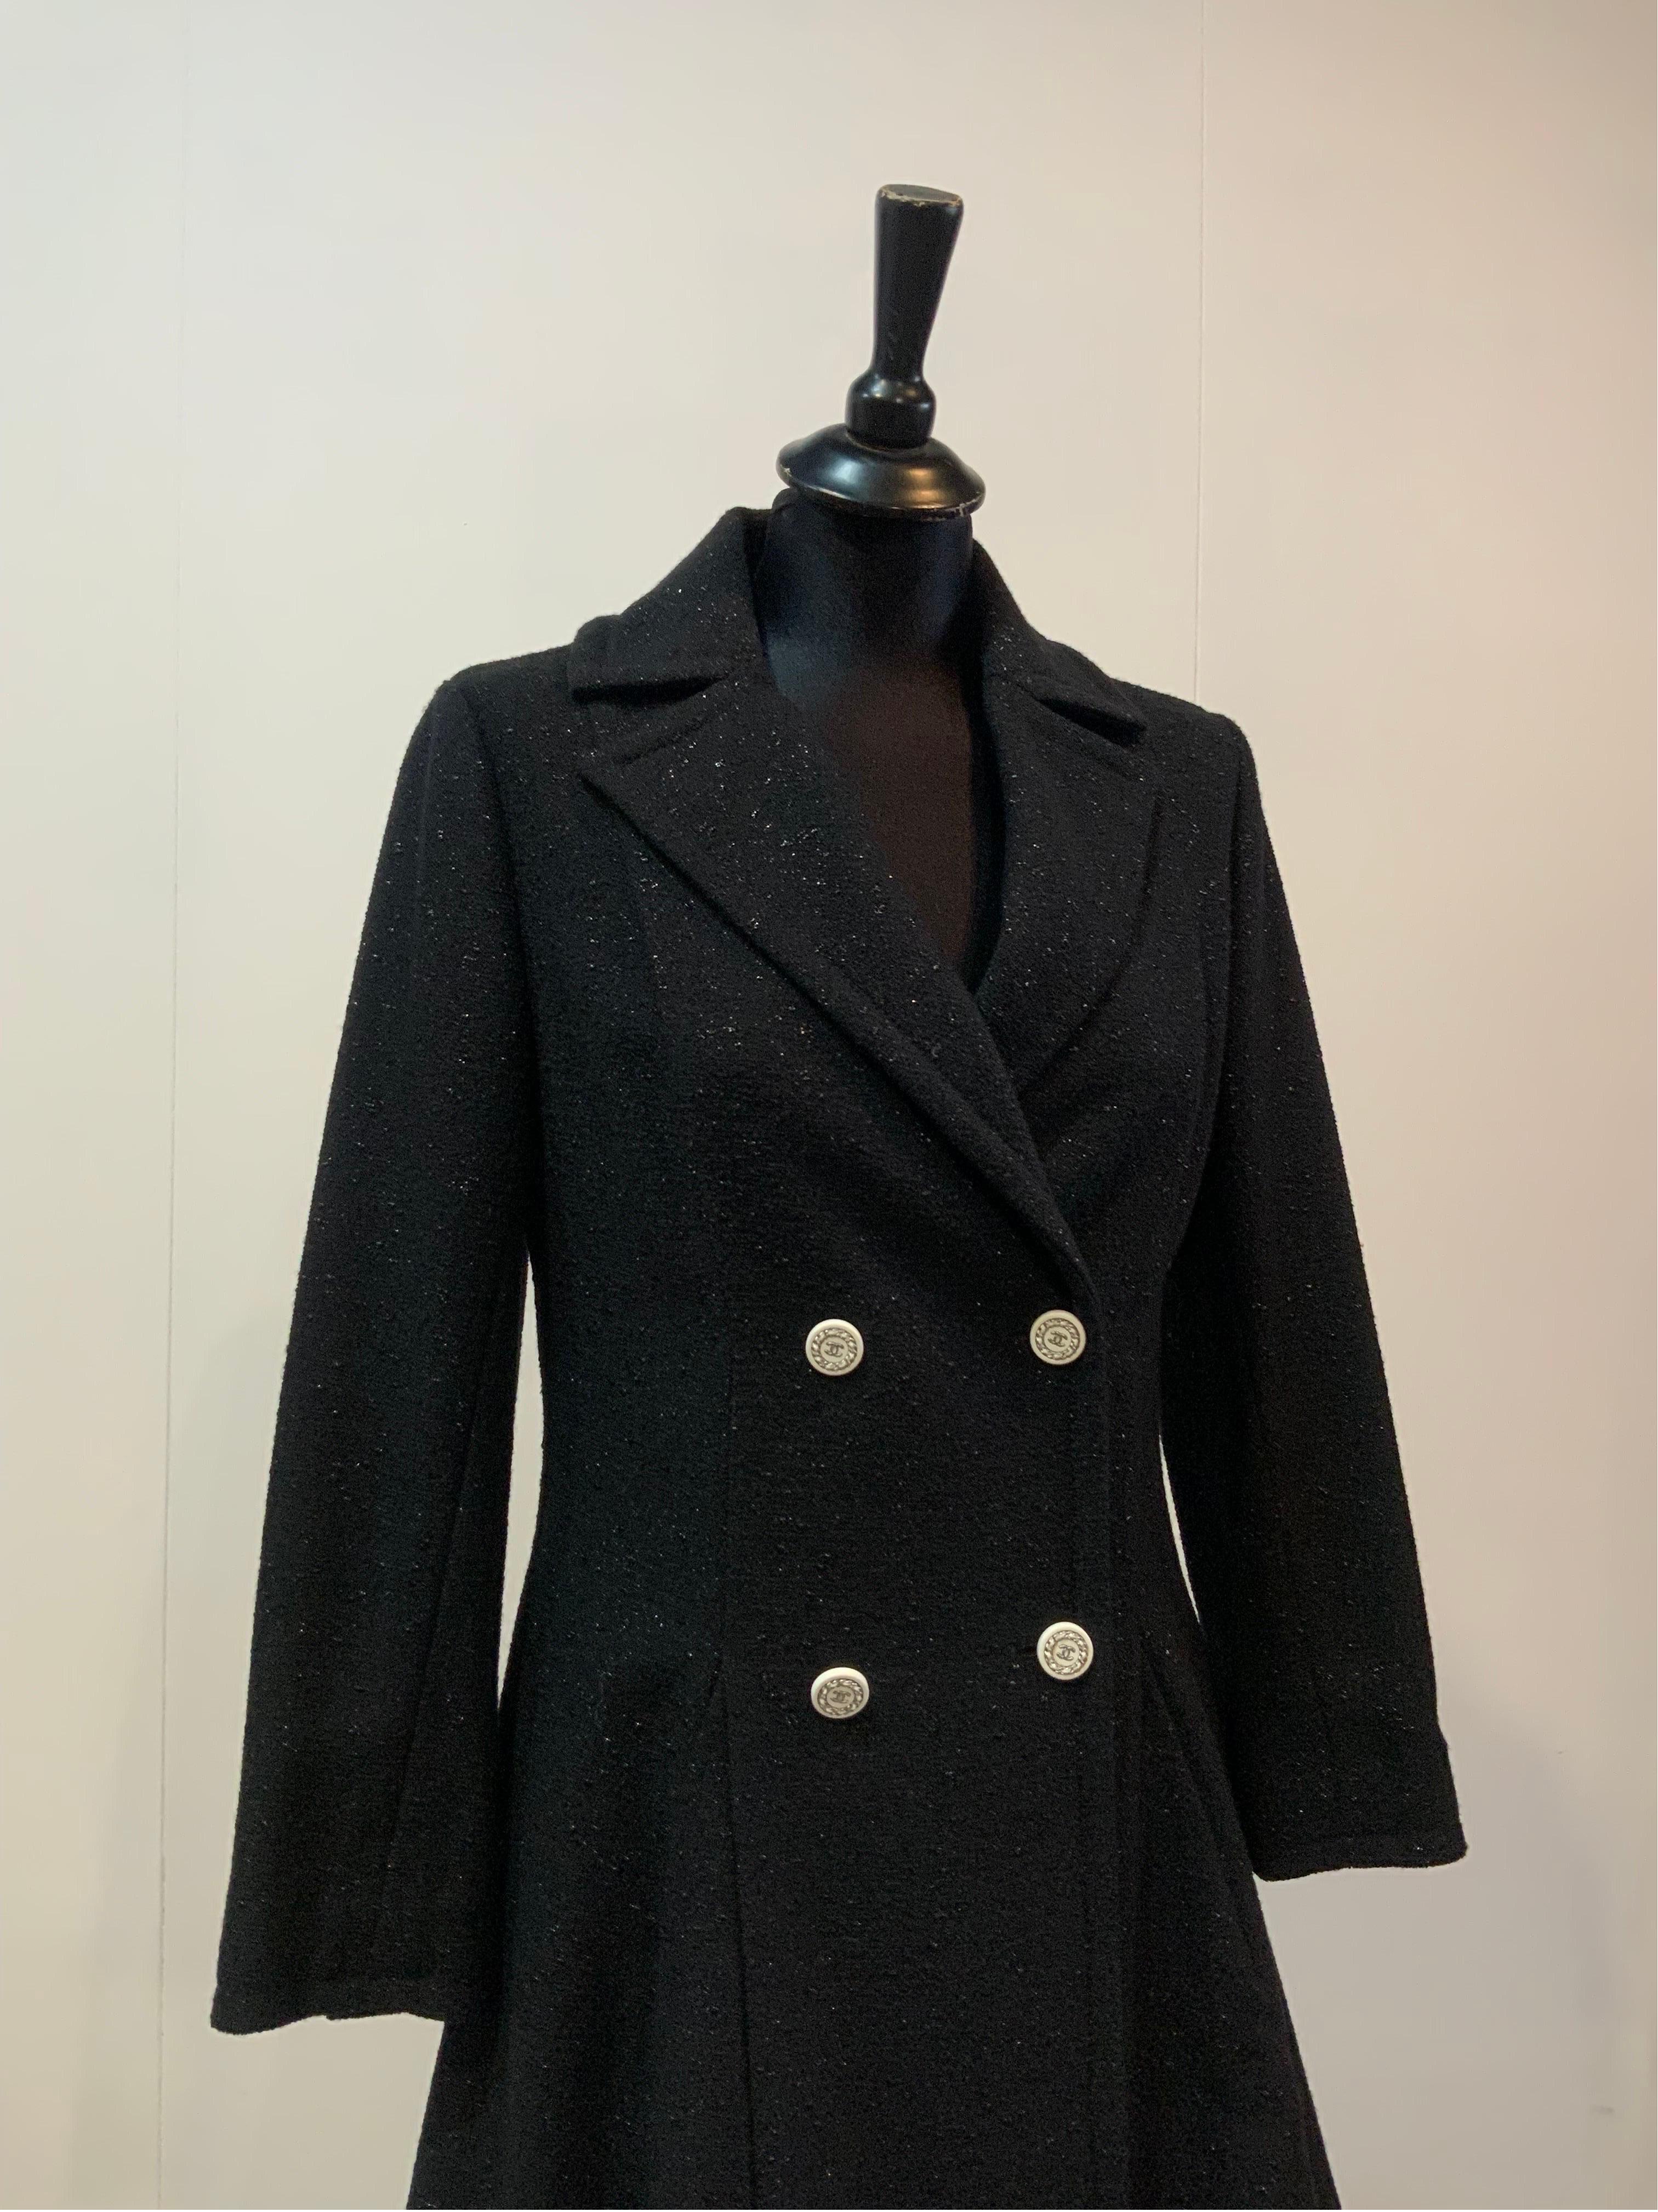 CHANEL OUTERWEAR.
In wool and polyamide. The pocket lining is in silk.
White and silver CC buttons. Lurex details.
French size 36 which corresponds to an Italian 40.
Shoulders 40 cm
Bust 44 cm
Length 88 cm
Sleeve 56 cm
Excellent general conditions.